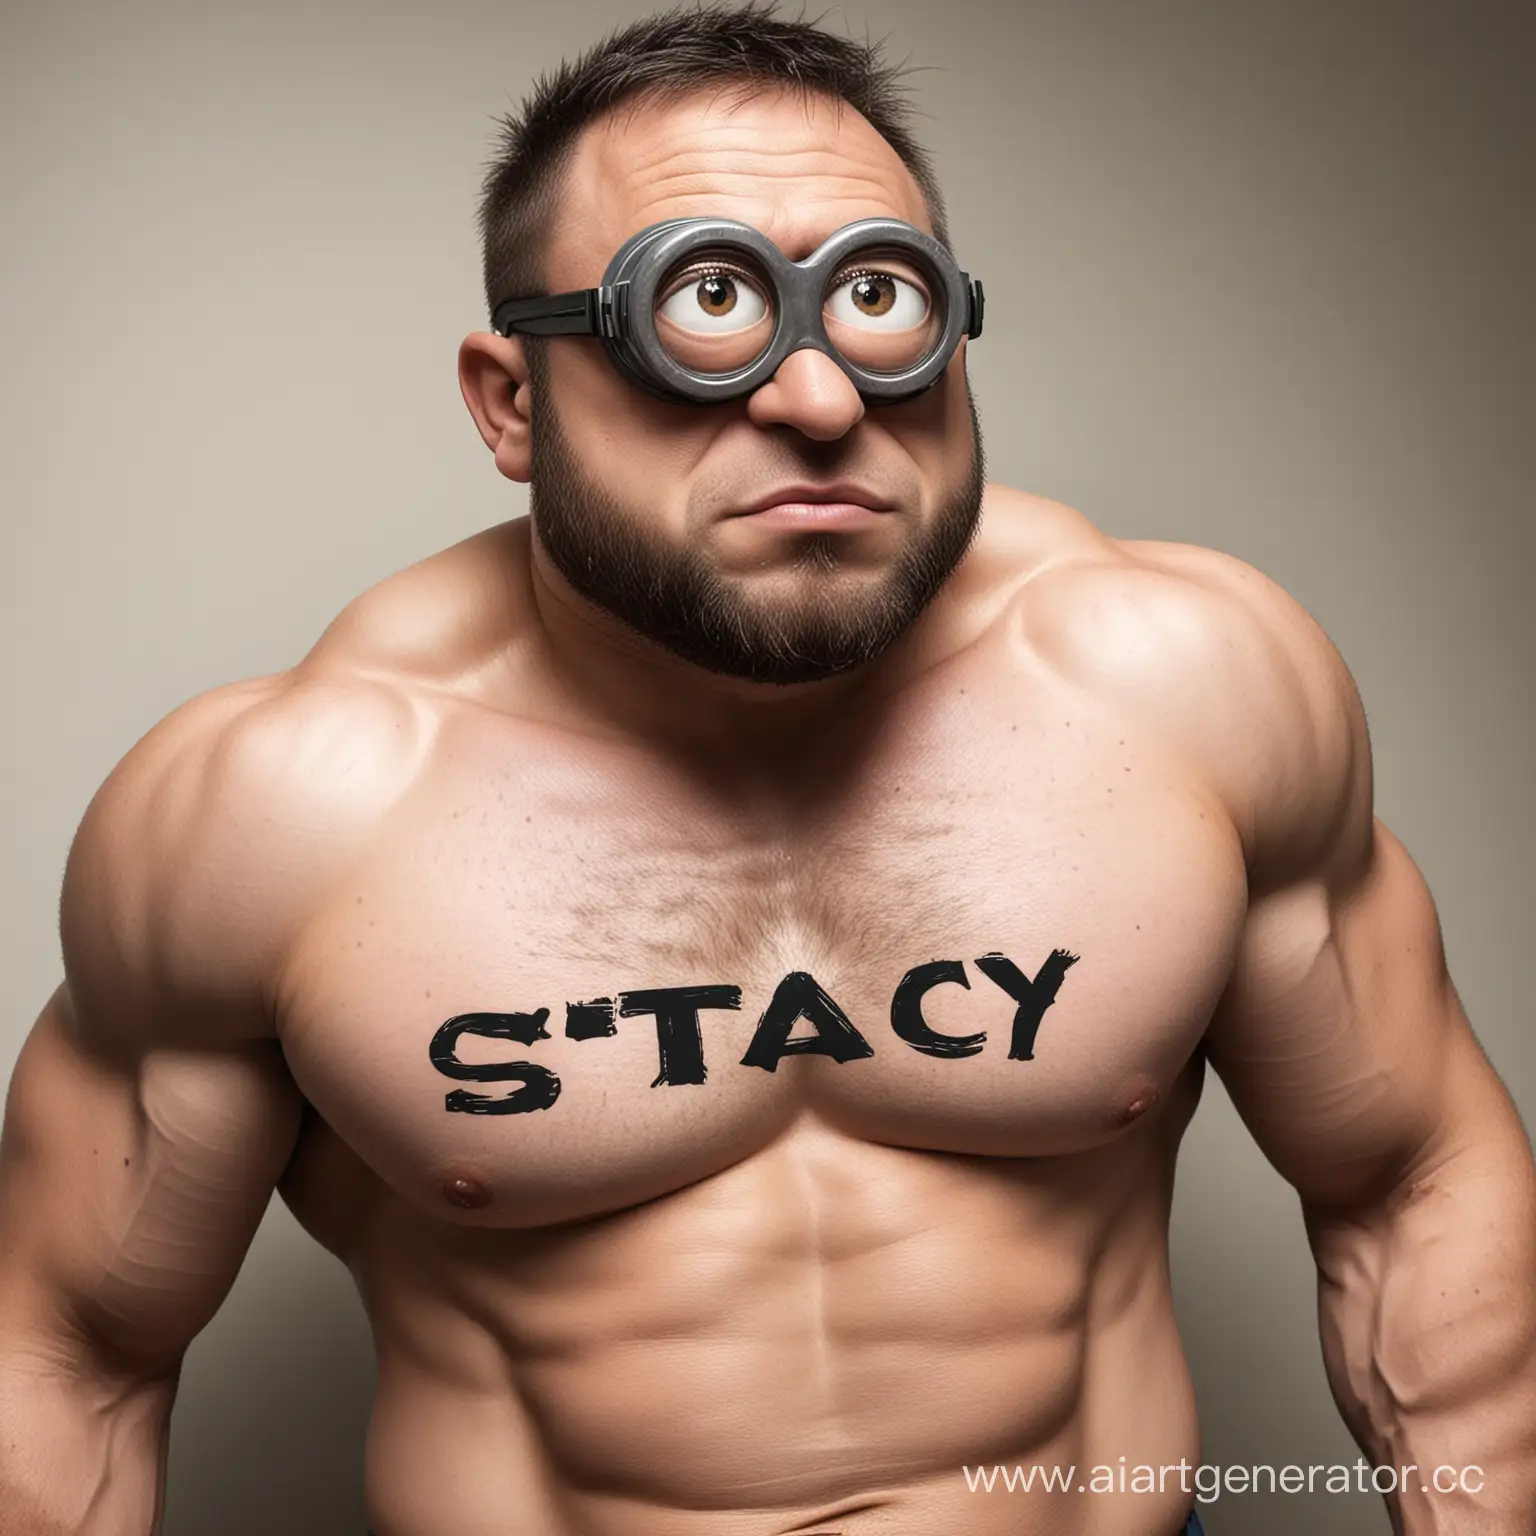 Strong-Minion-with-Stacy-Emblazoned-on-the-Chest